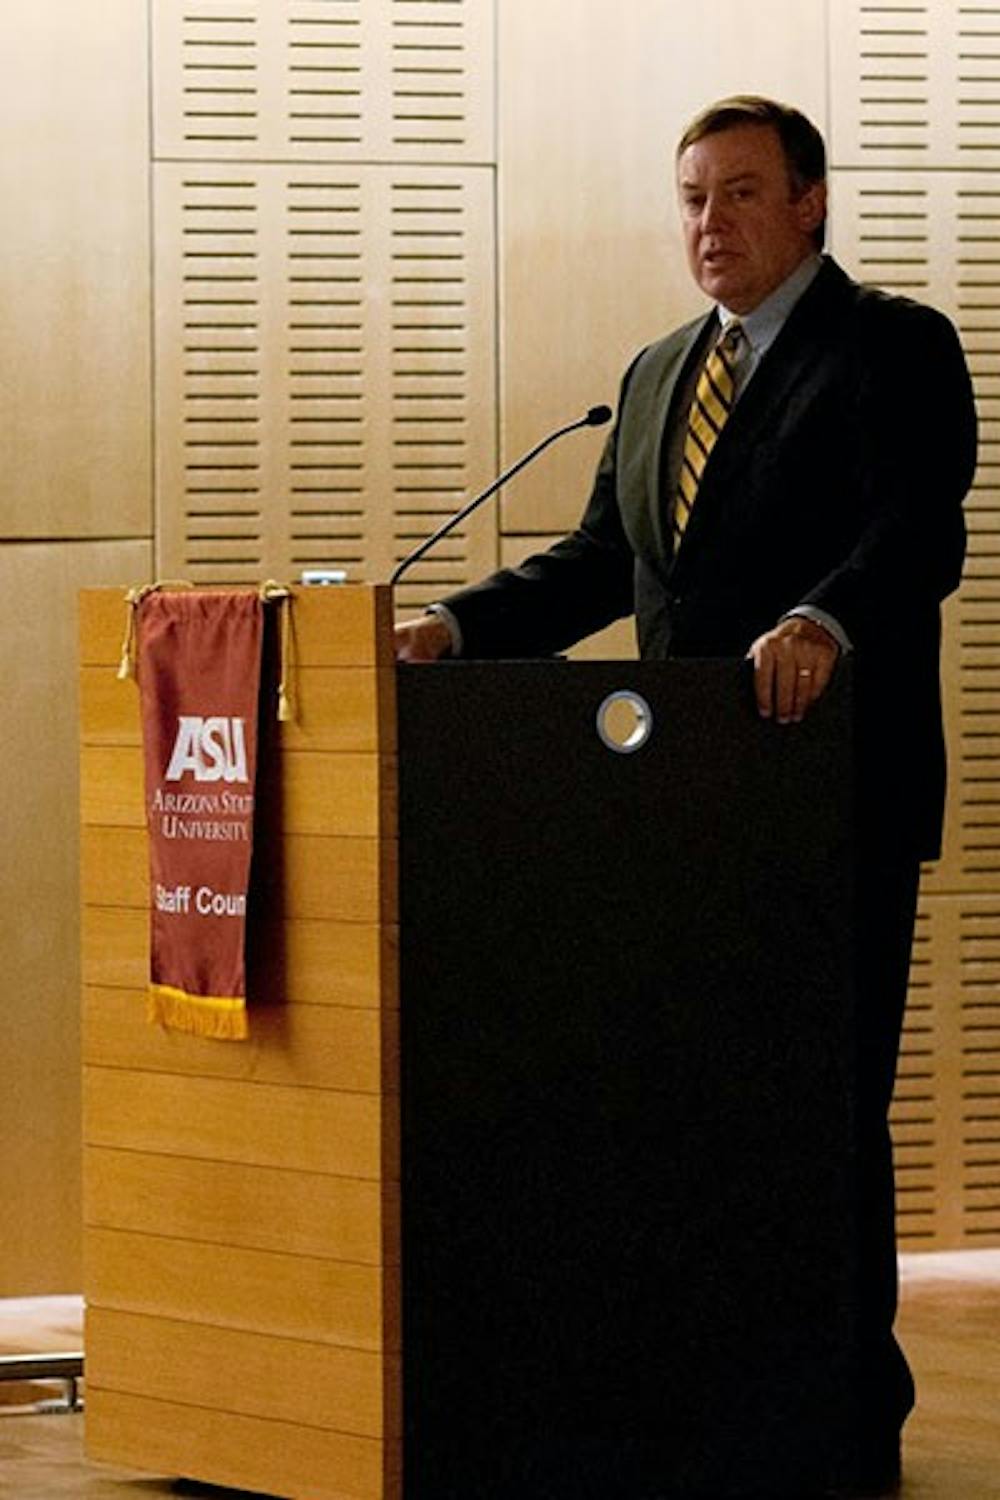 ASU President Michael Crow told a room full of community members Wednesday night at the Tempe campus that ASU's involvement within the community would be facilitated through three major areas: individuals, institutions and technology.

The event, organized by Changemaker Central, focused on how individuals within the ASU community are able to directly and indirectly invoke change through various University resources. (Photo by Diana Lustig)